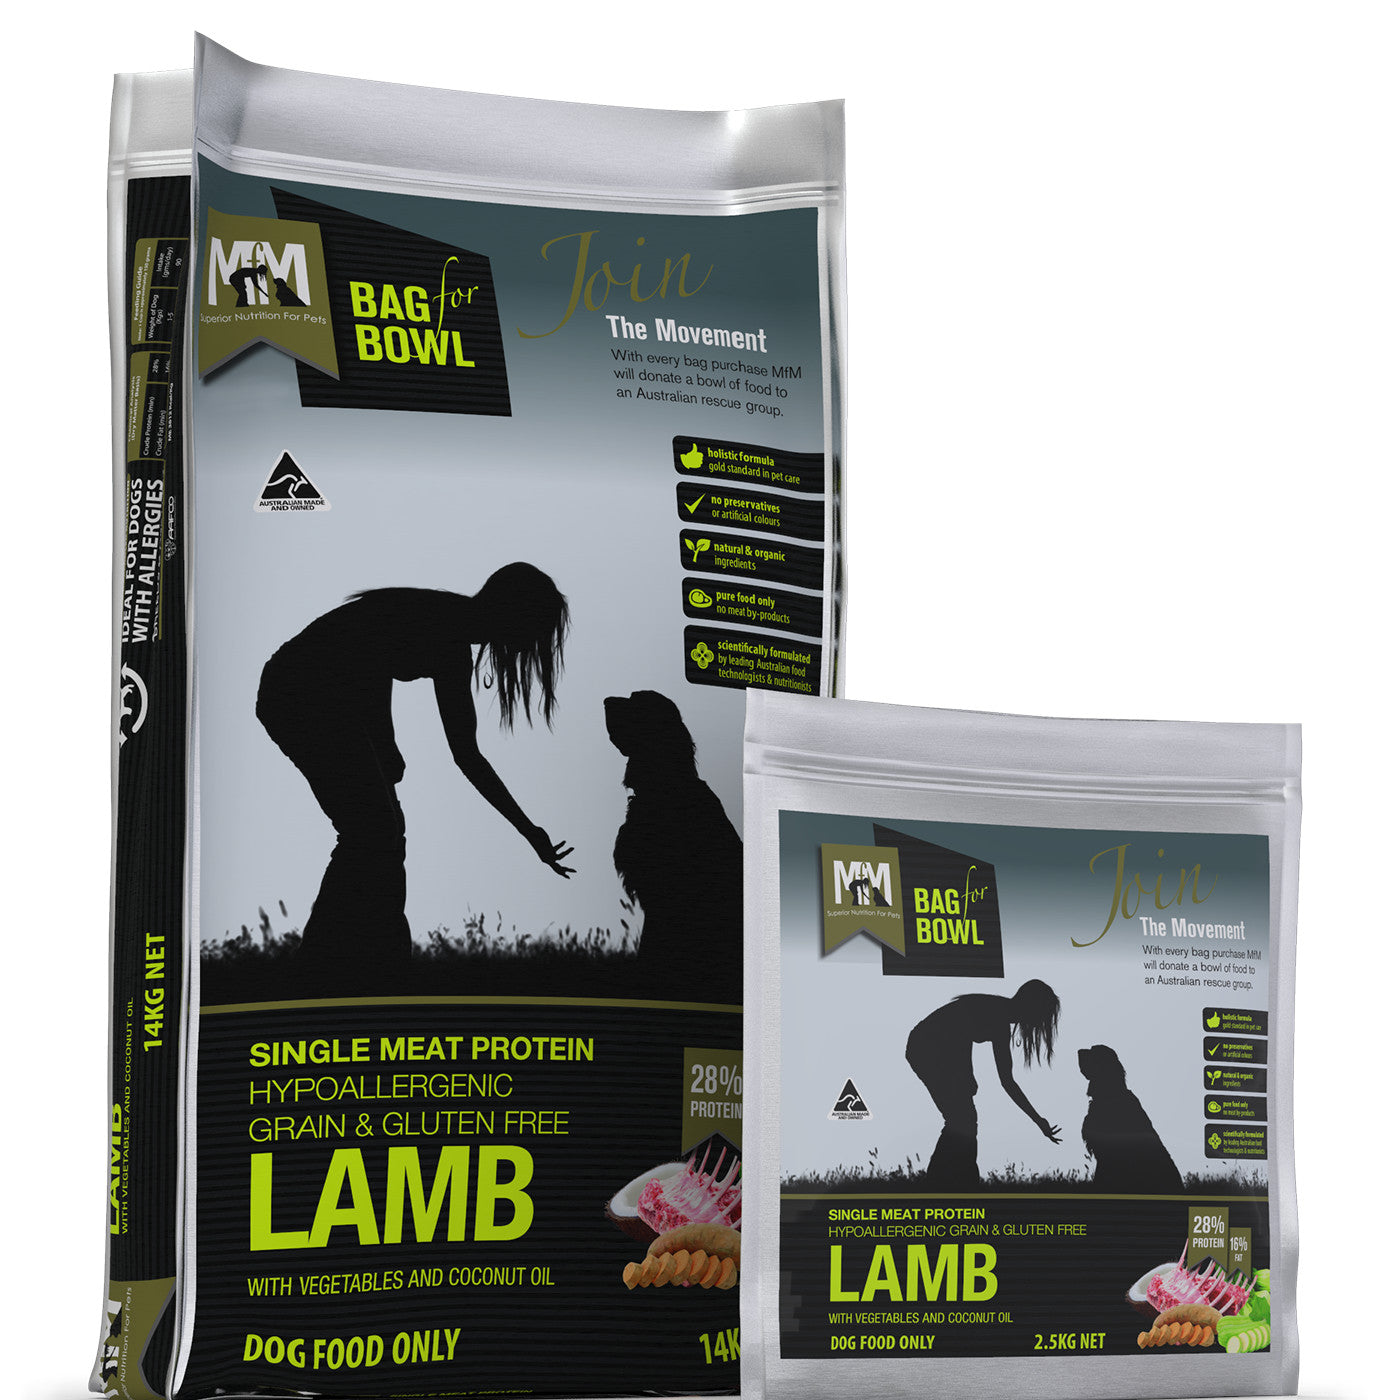 Meals for Mutts Lamb Single Meat Protein Dog Food.